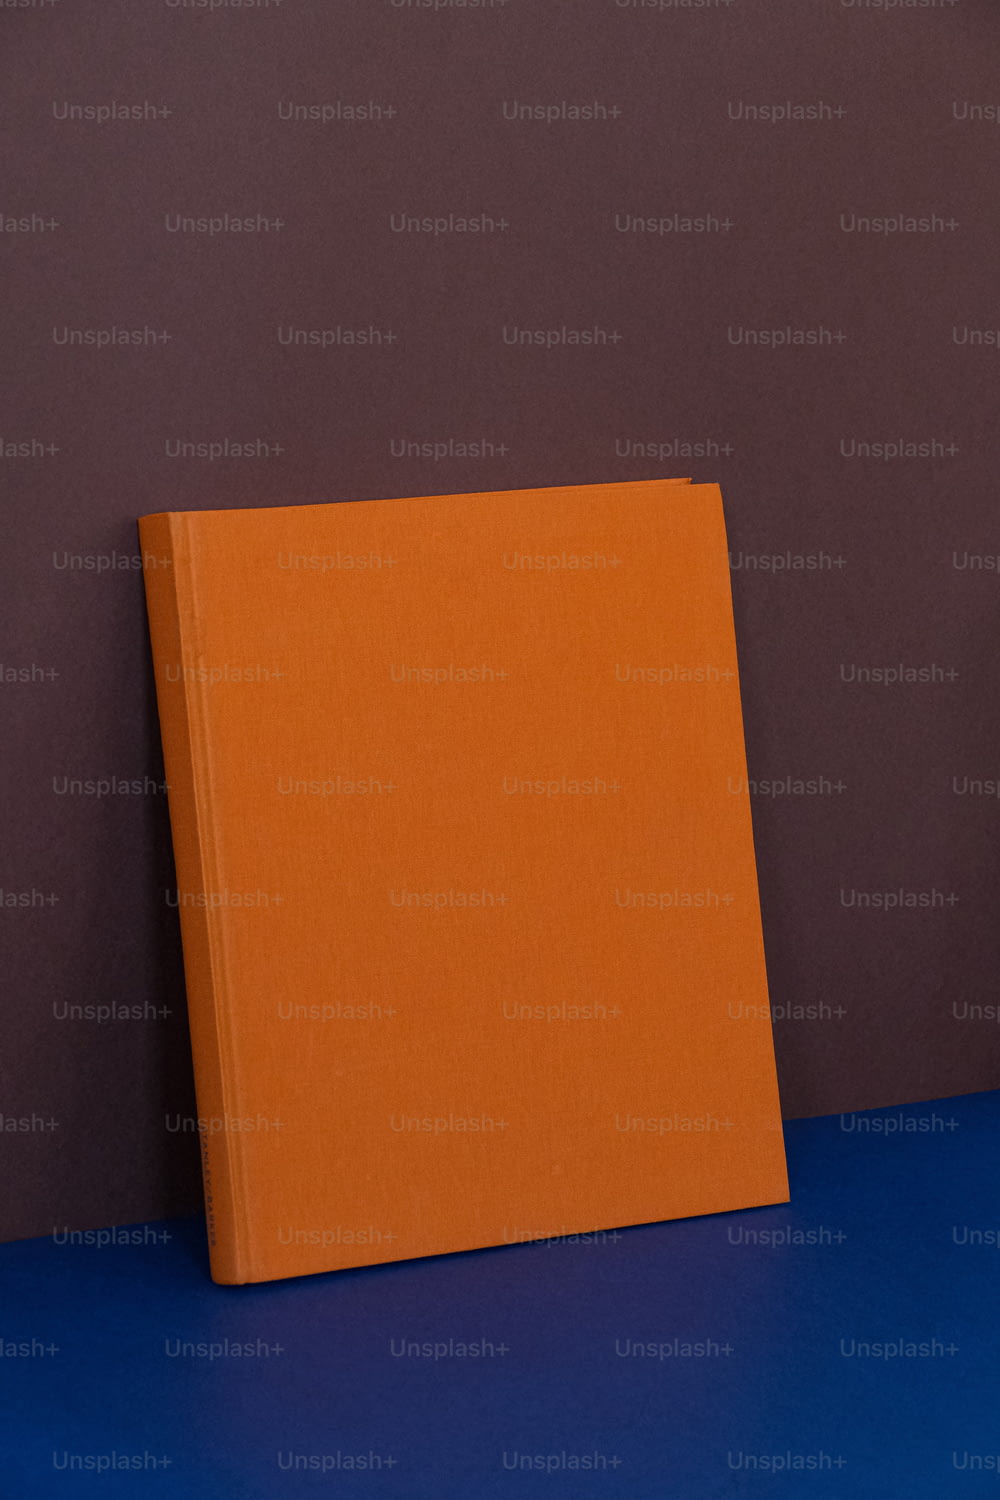 an orange book sitting on top of a blue table